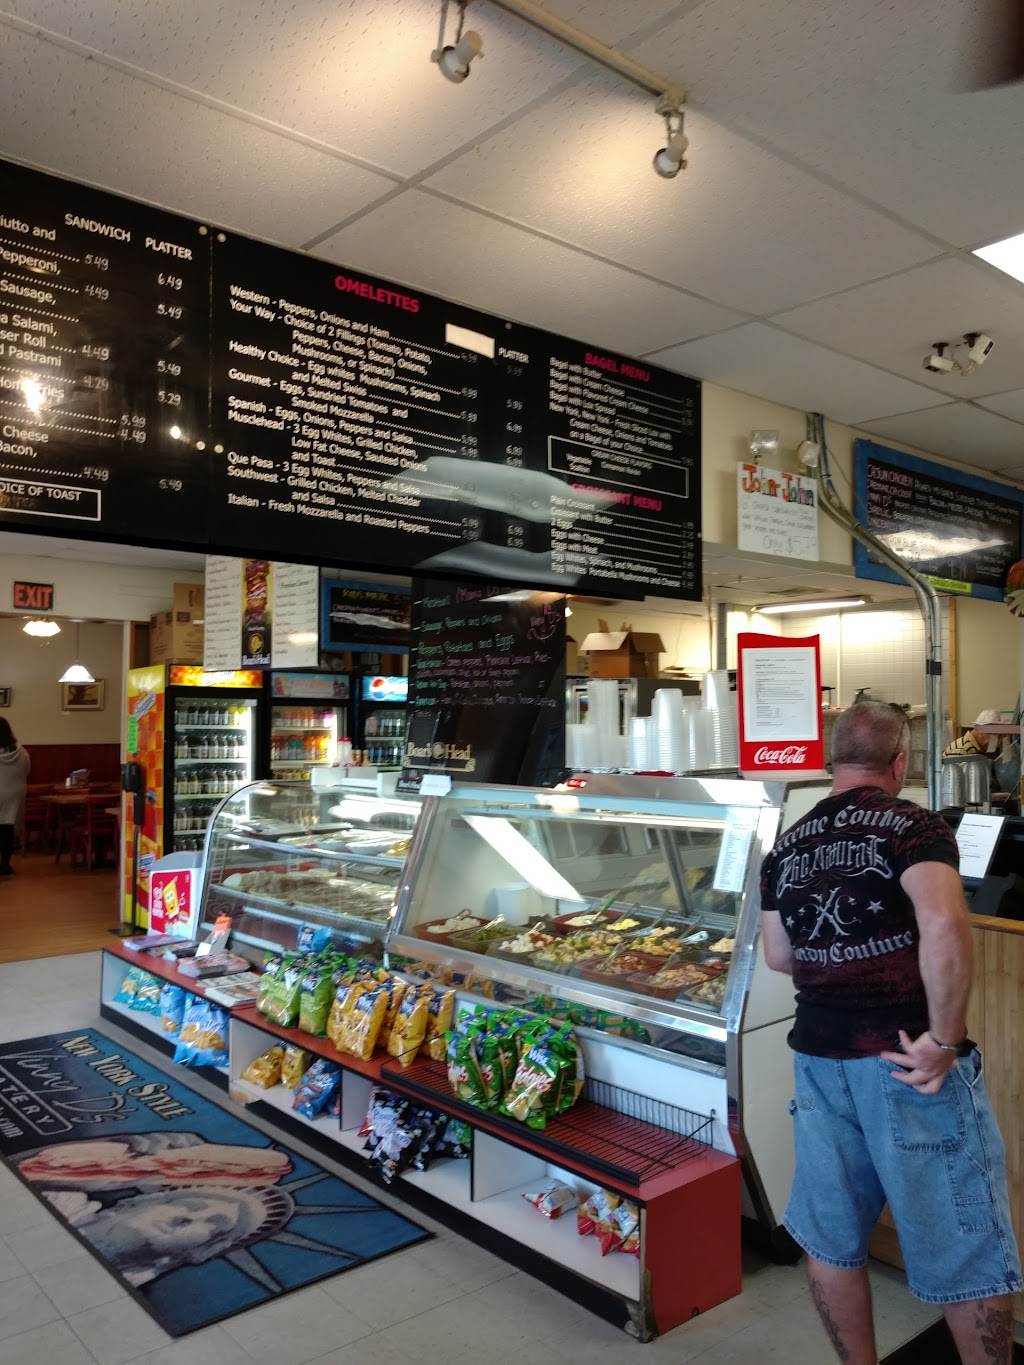 Vinny Ds Deli & Catering | 730 Milford Rd #4, East Stroudsburg, PA 18301 | Phone: (570) 421-6868